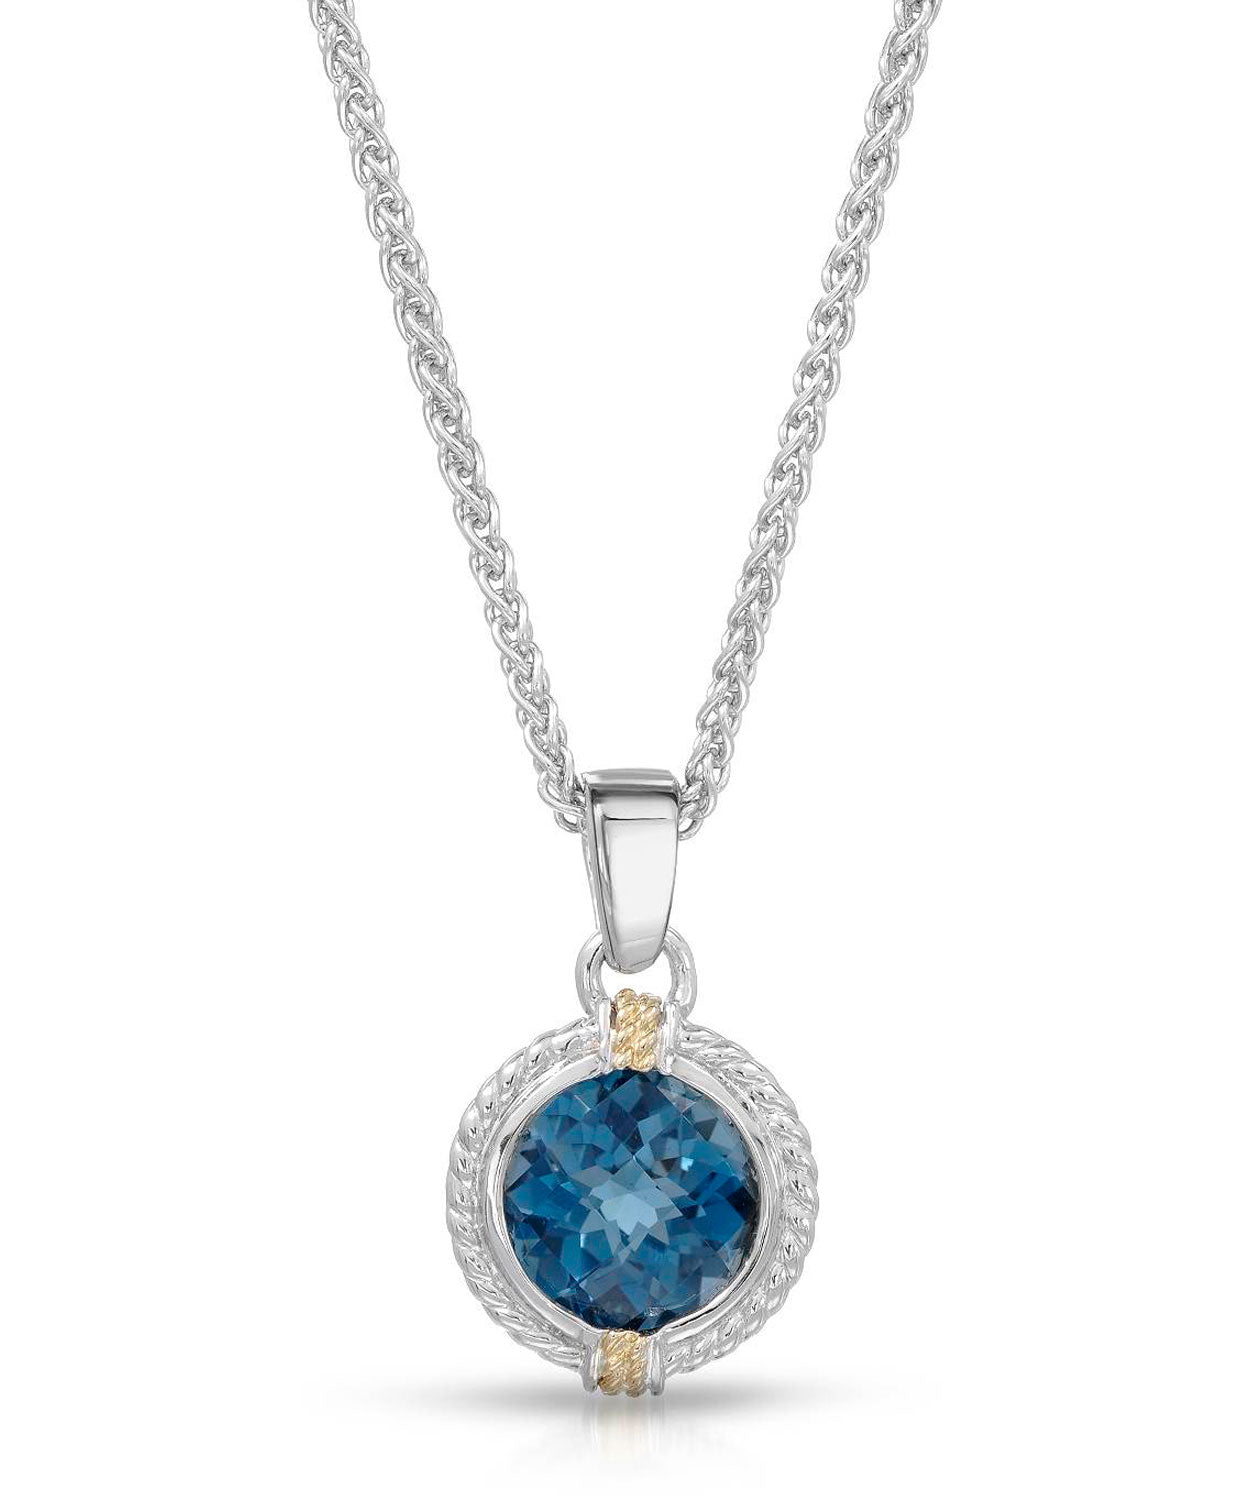 Colore by Simon Golub 4.75 ctw Natural Fine London Blue Topaz 925 Sterling Silver Pendant With Chain - With 18k Gold Inlay View 1